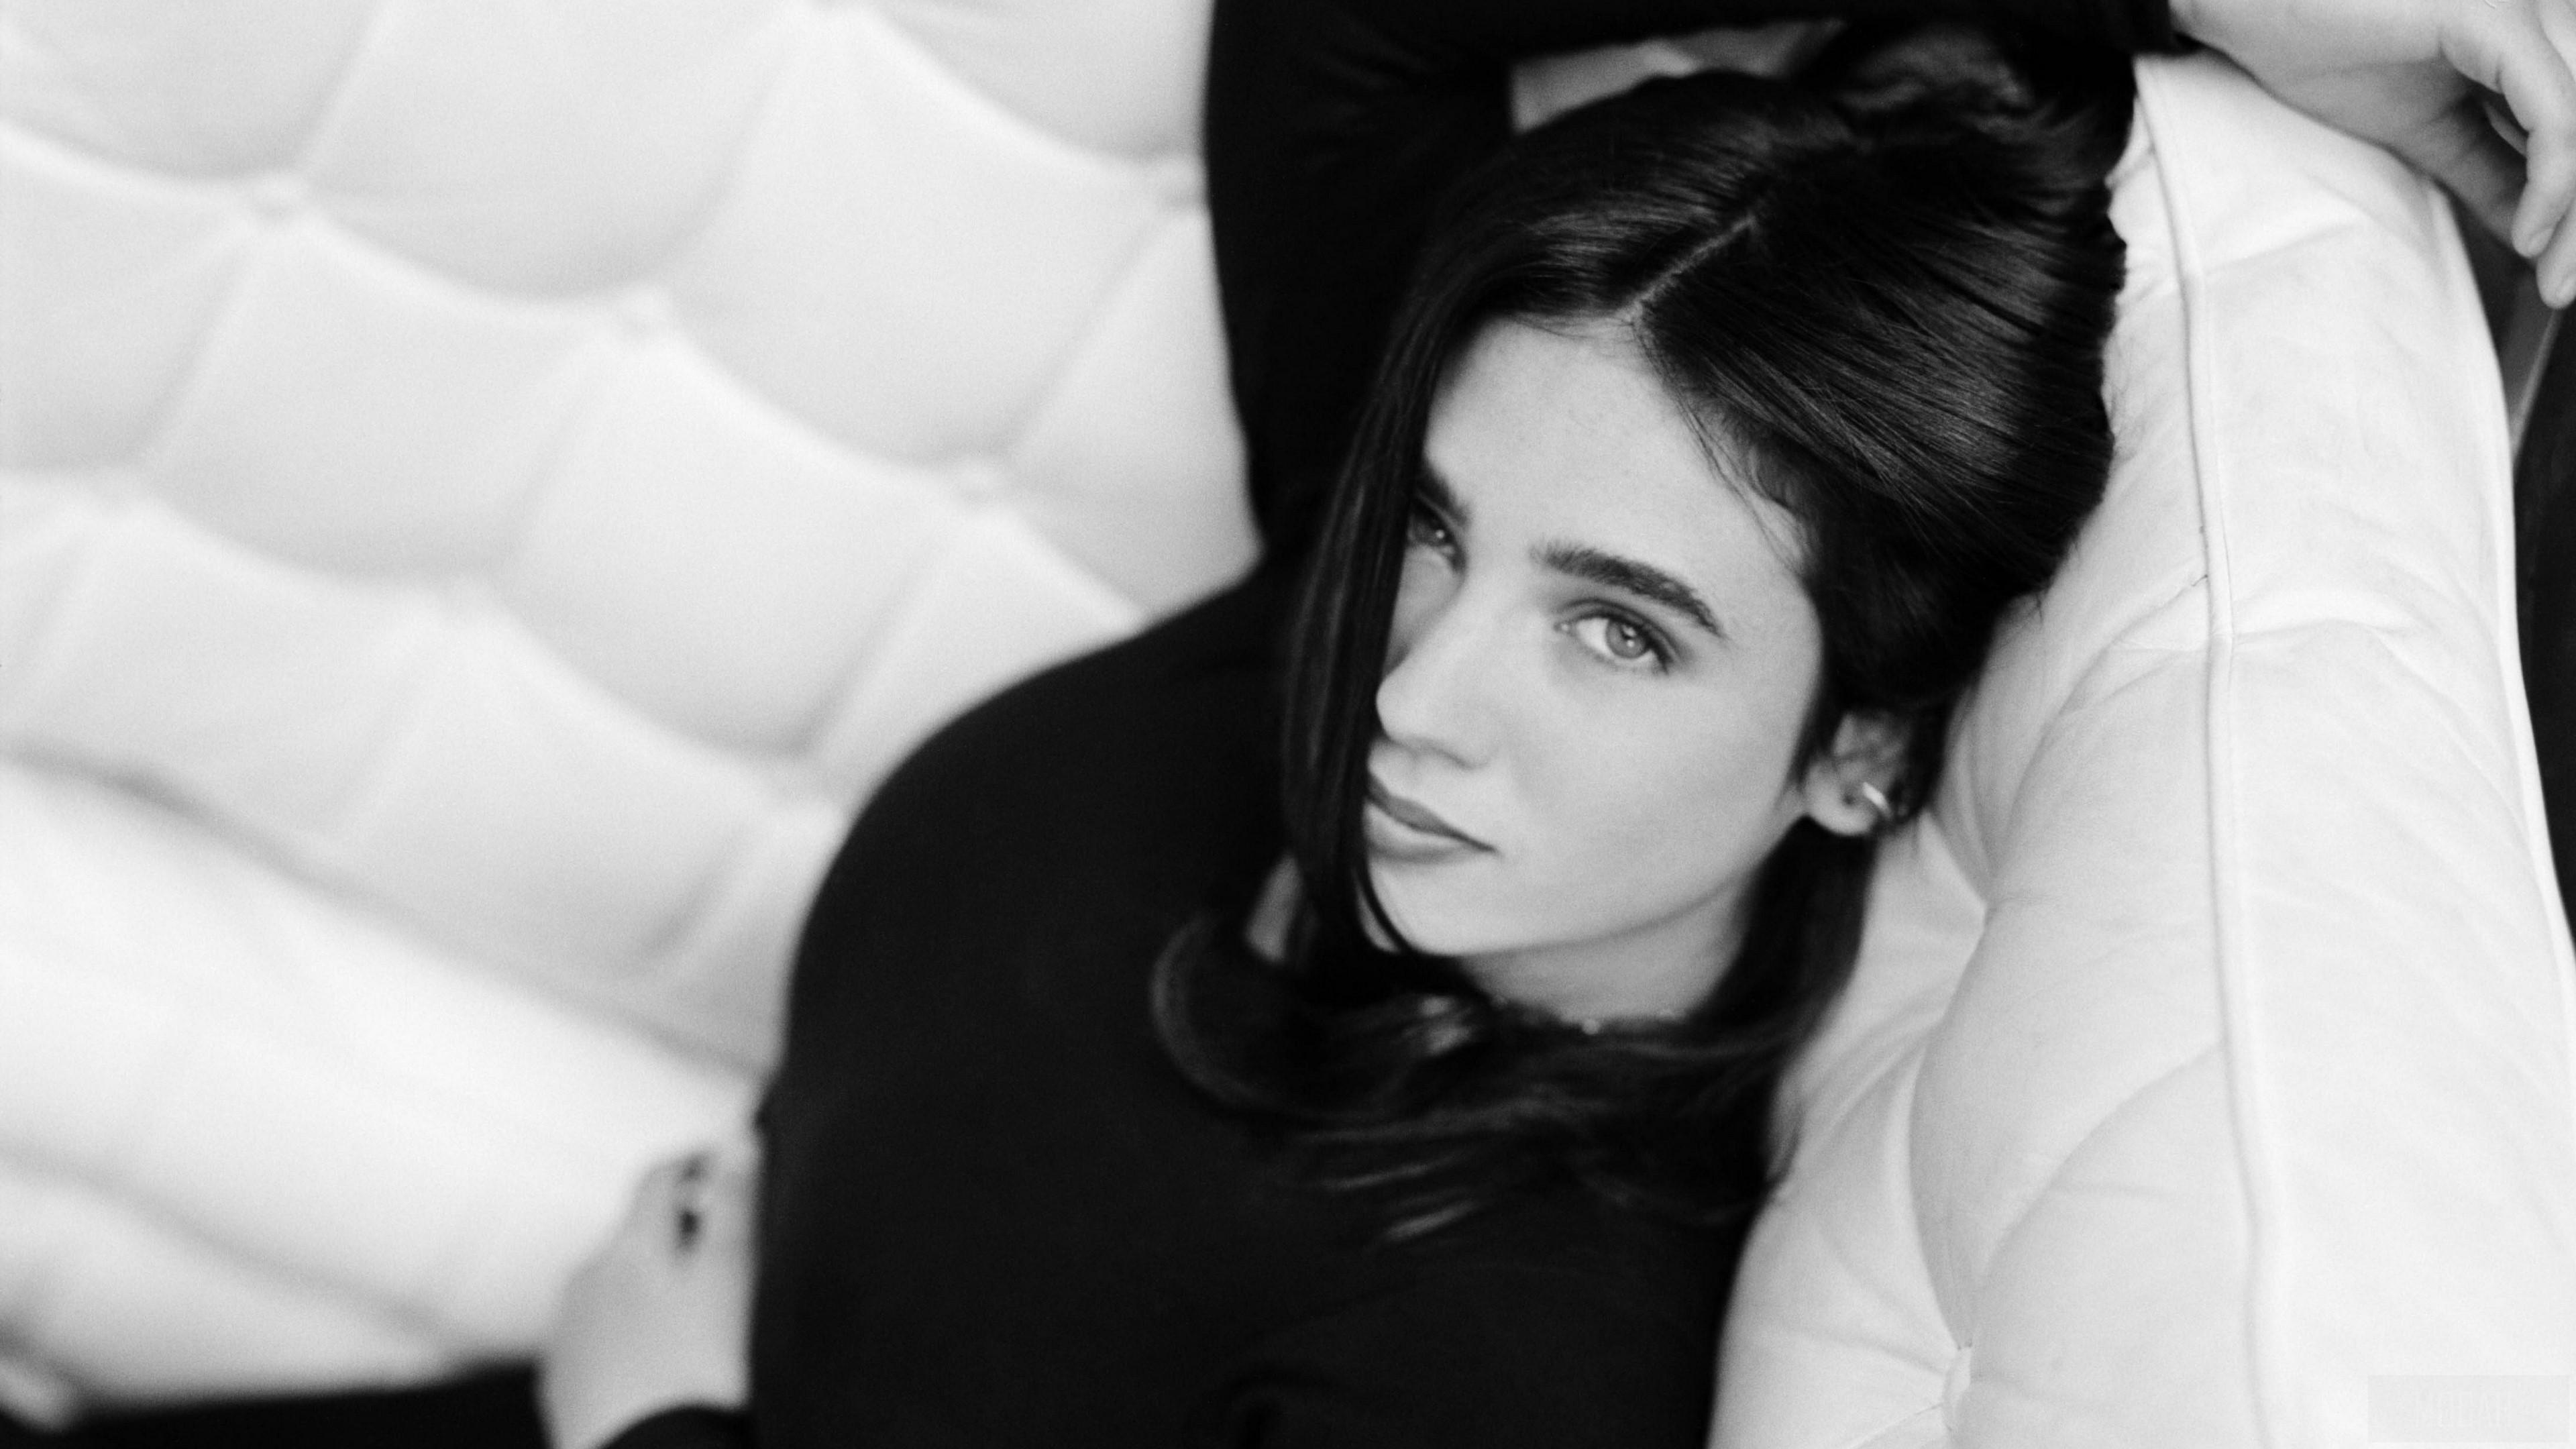 HD wallpaper, Actress, American, Jennifer Connelly 4K, Black And White